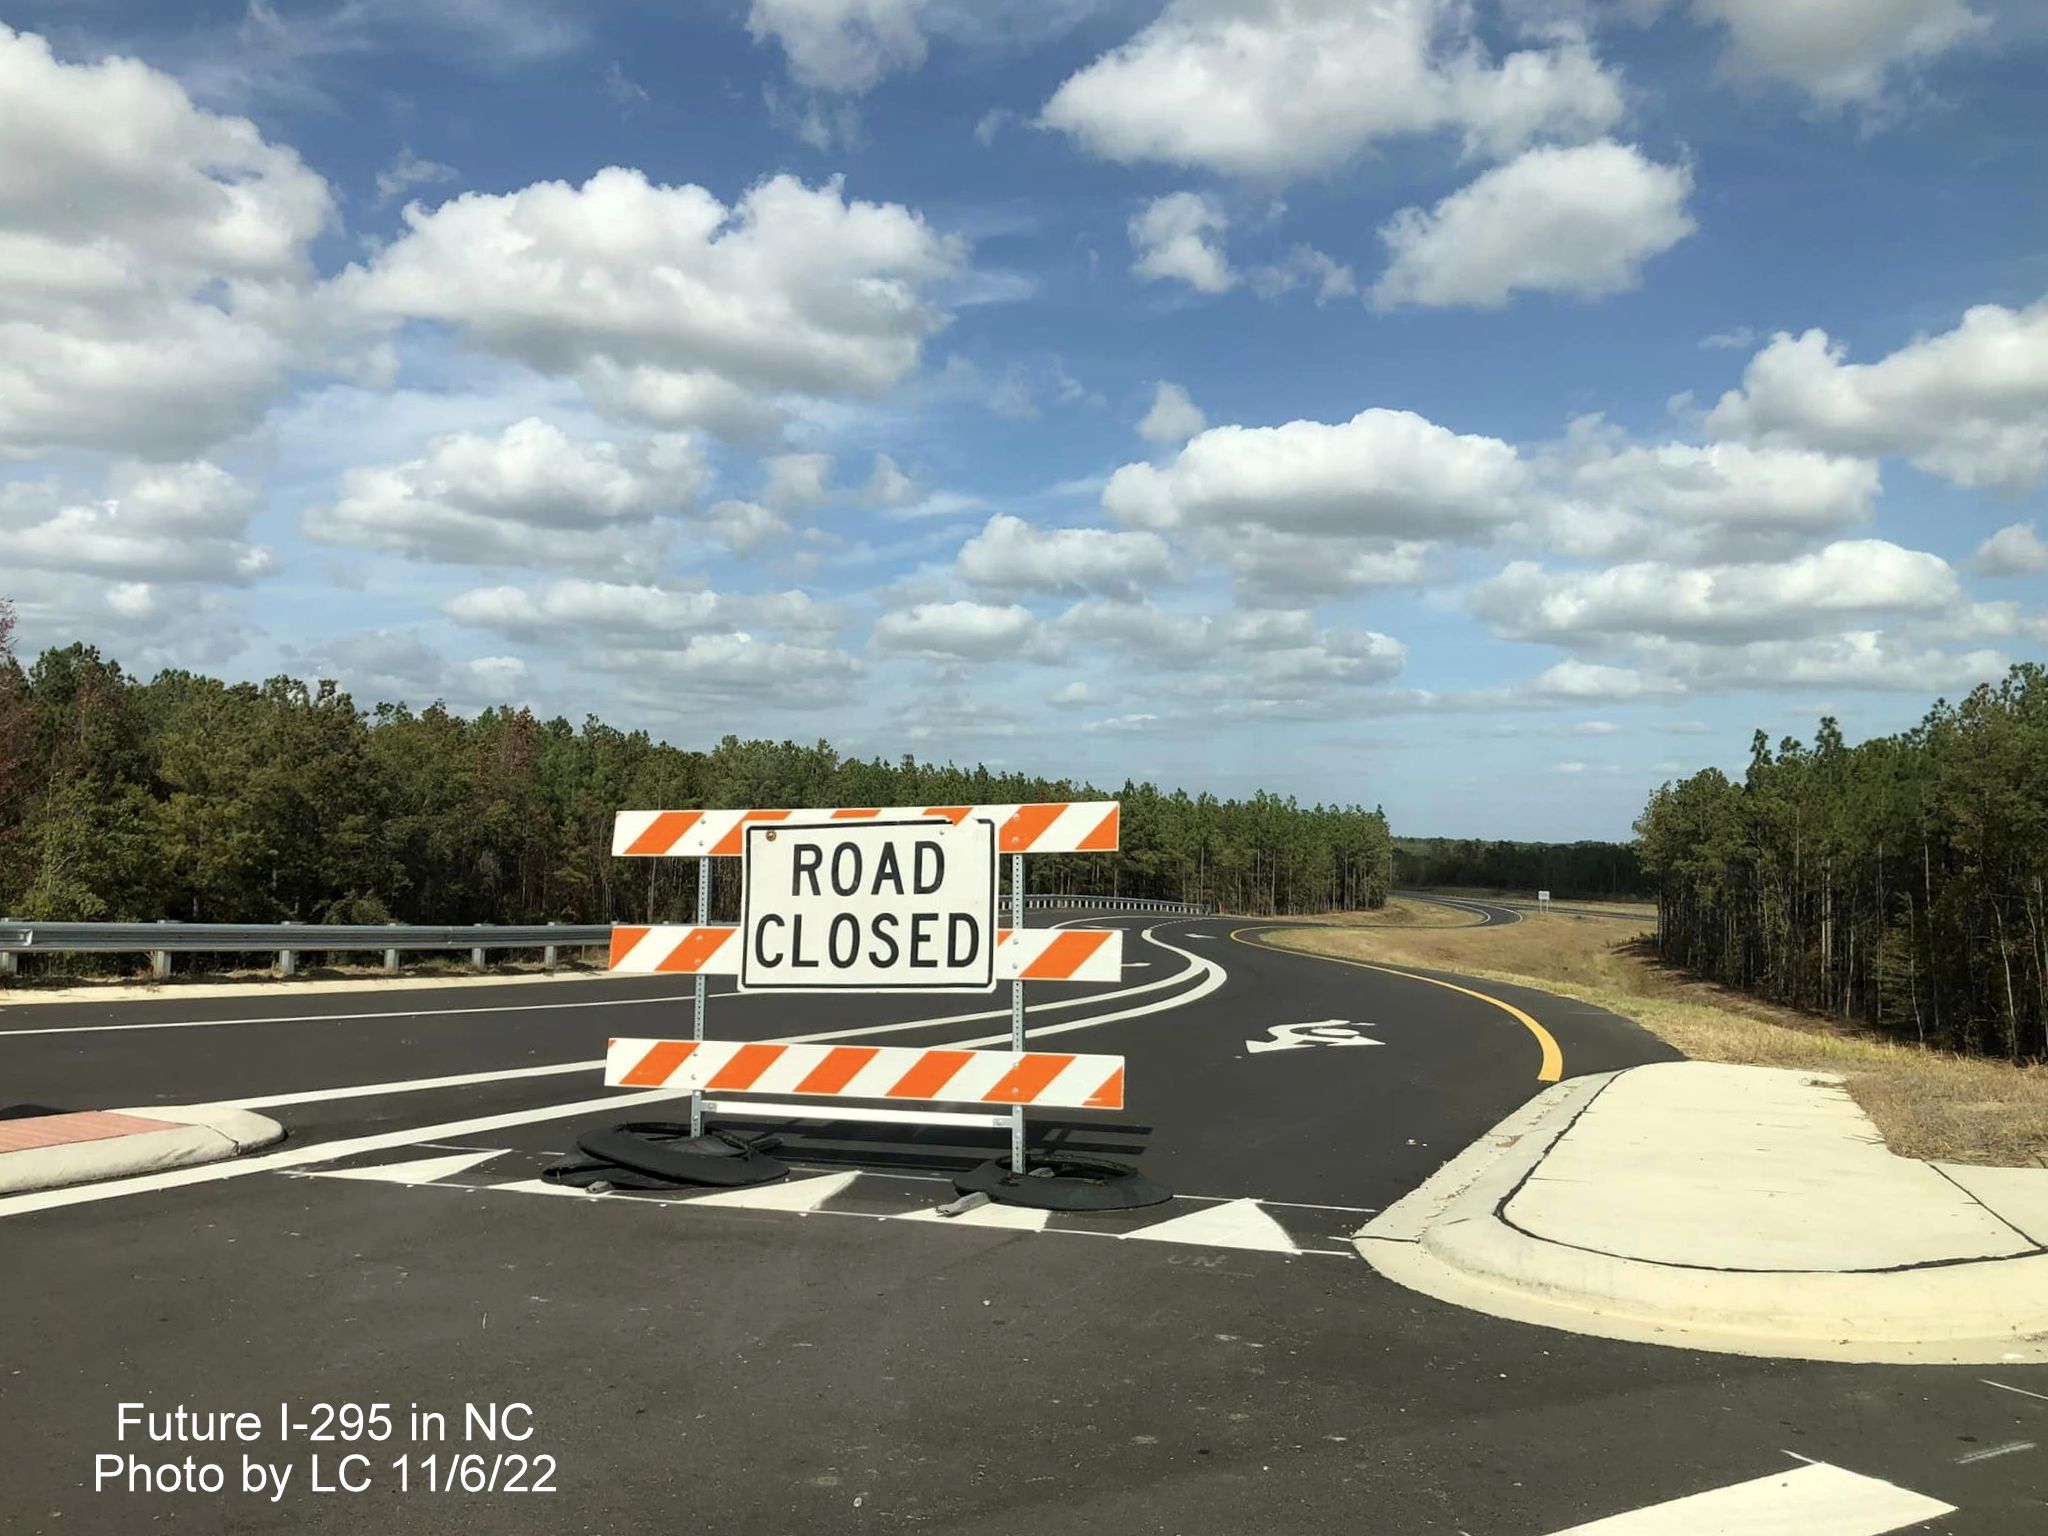 Image taken of future on-ramp to Black Bridge Road from soon to 
        be opened section of Fayetteville Outer Loop from Parkton/Leeper Roads, by LC, November 2022